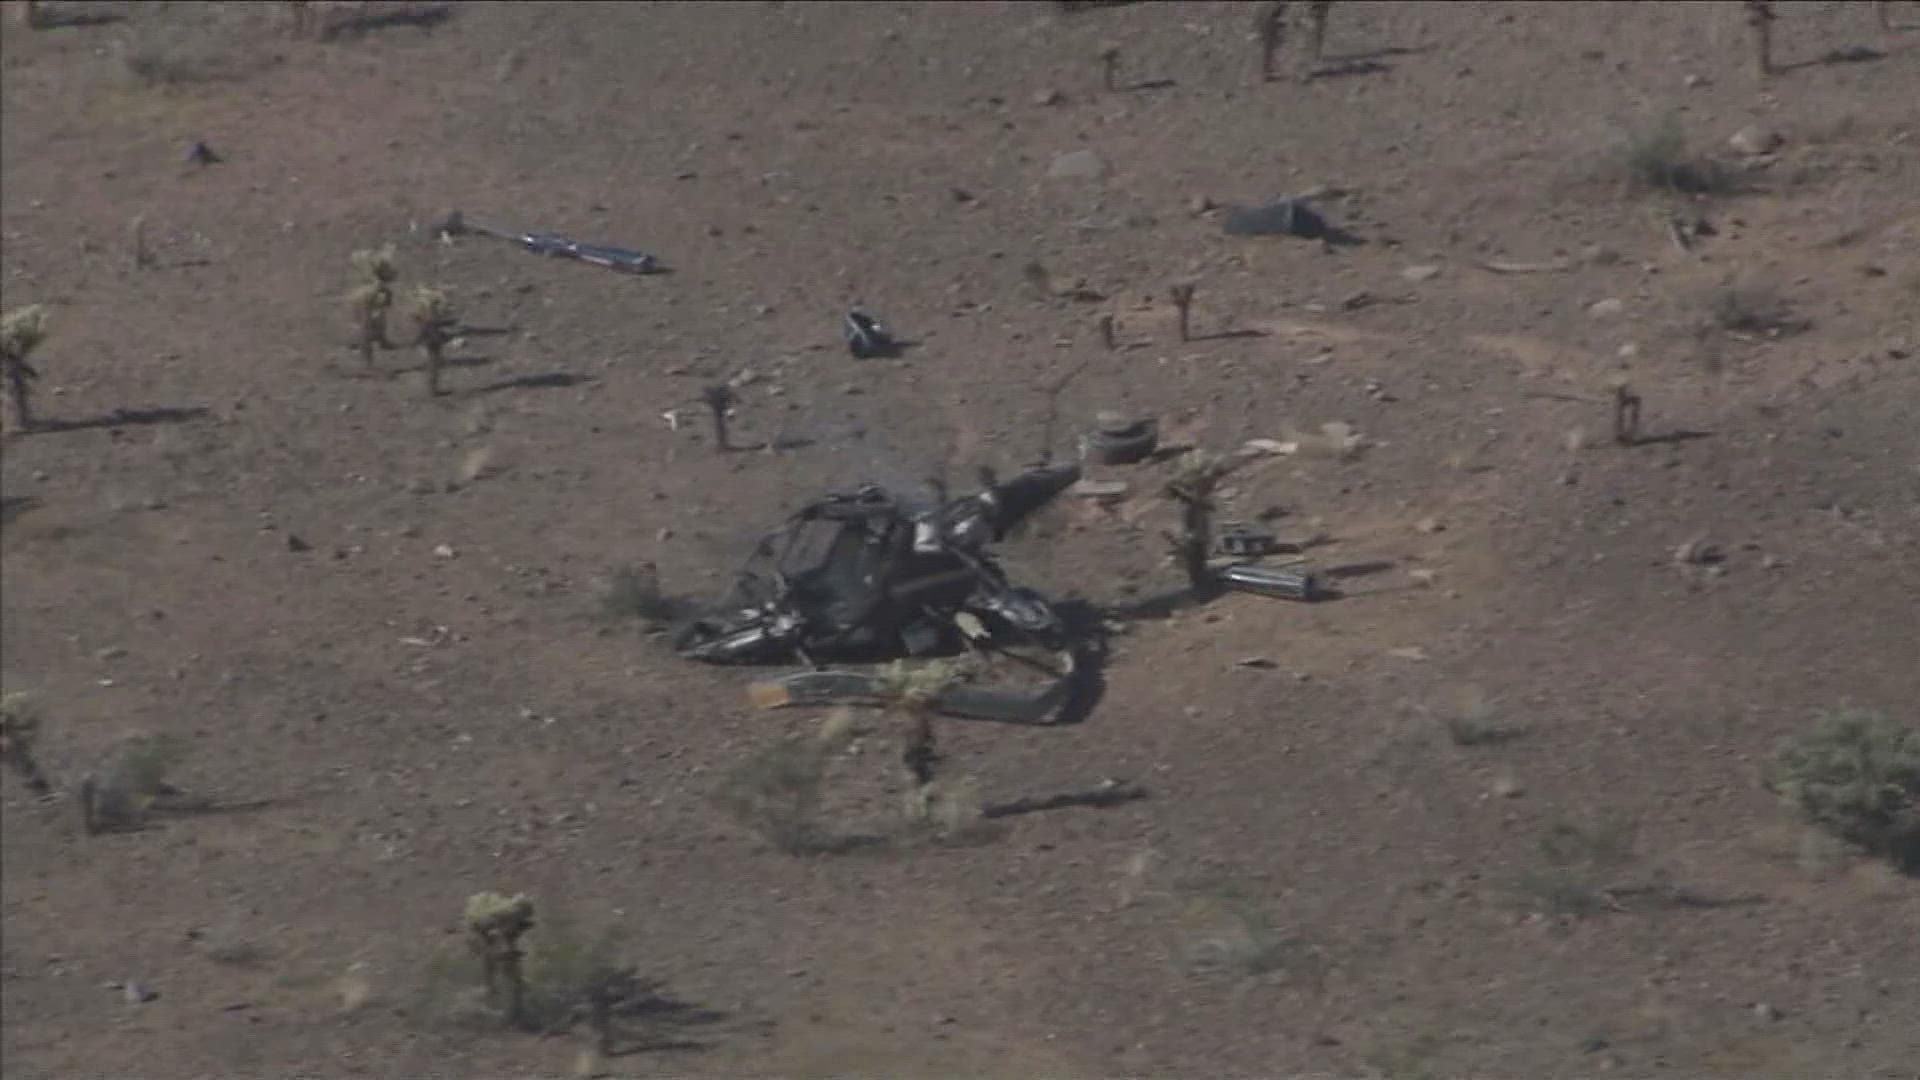 Authorities are investigating a helicopter crash reported Monday morning near Beeline Highway and North Power Road, located northeast of Mesa.